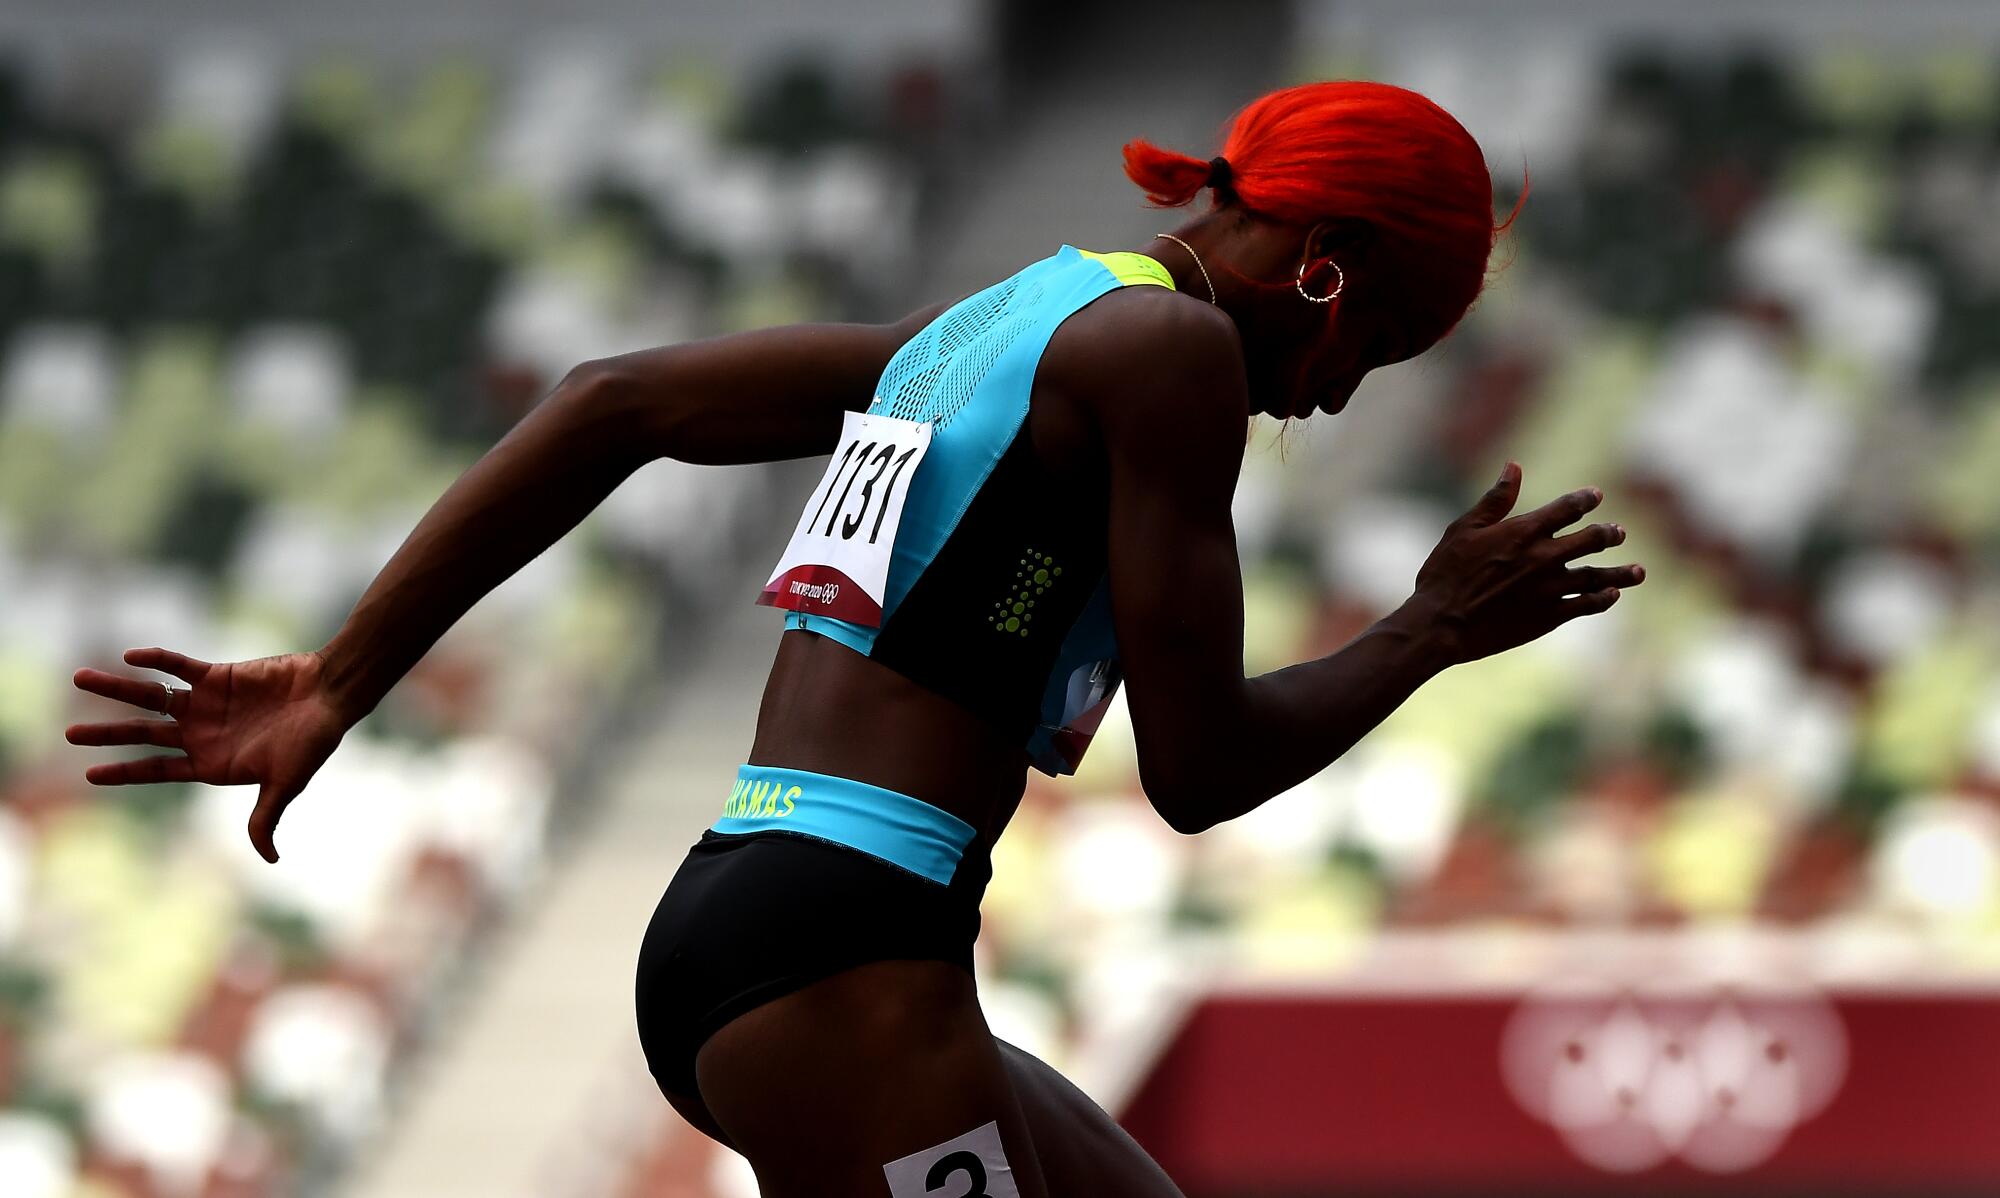 Bahama's Shaunae Miller-Uibo warms-up before round 1 of the 200m race.